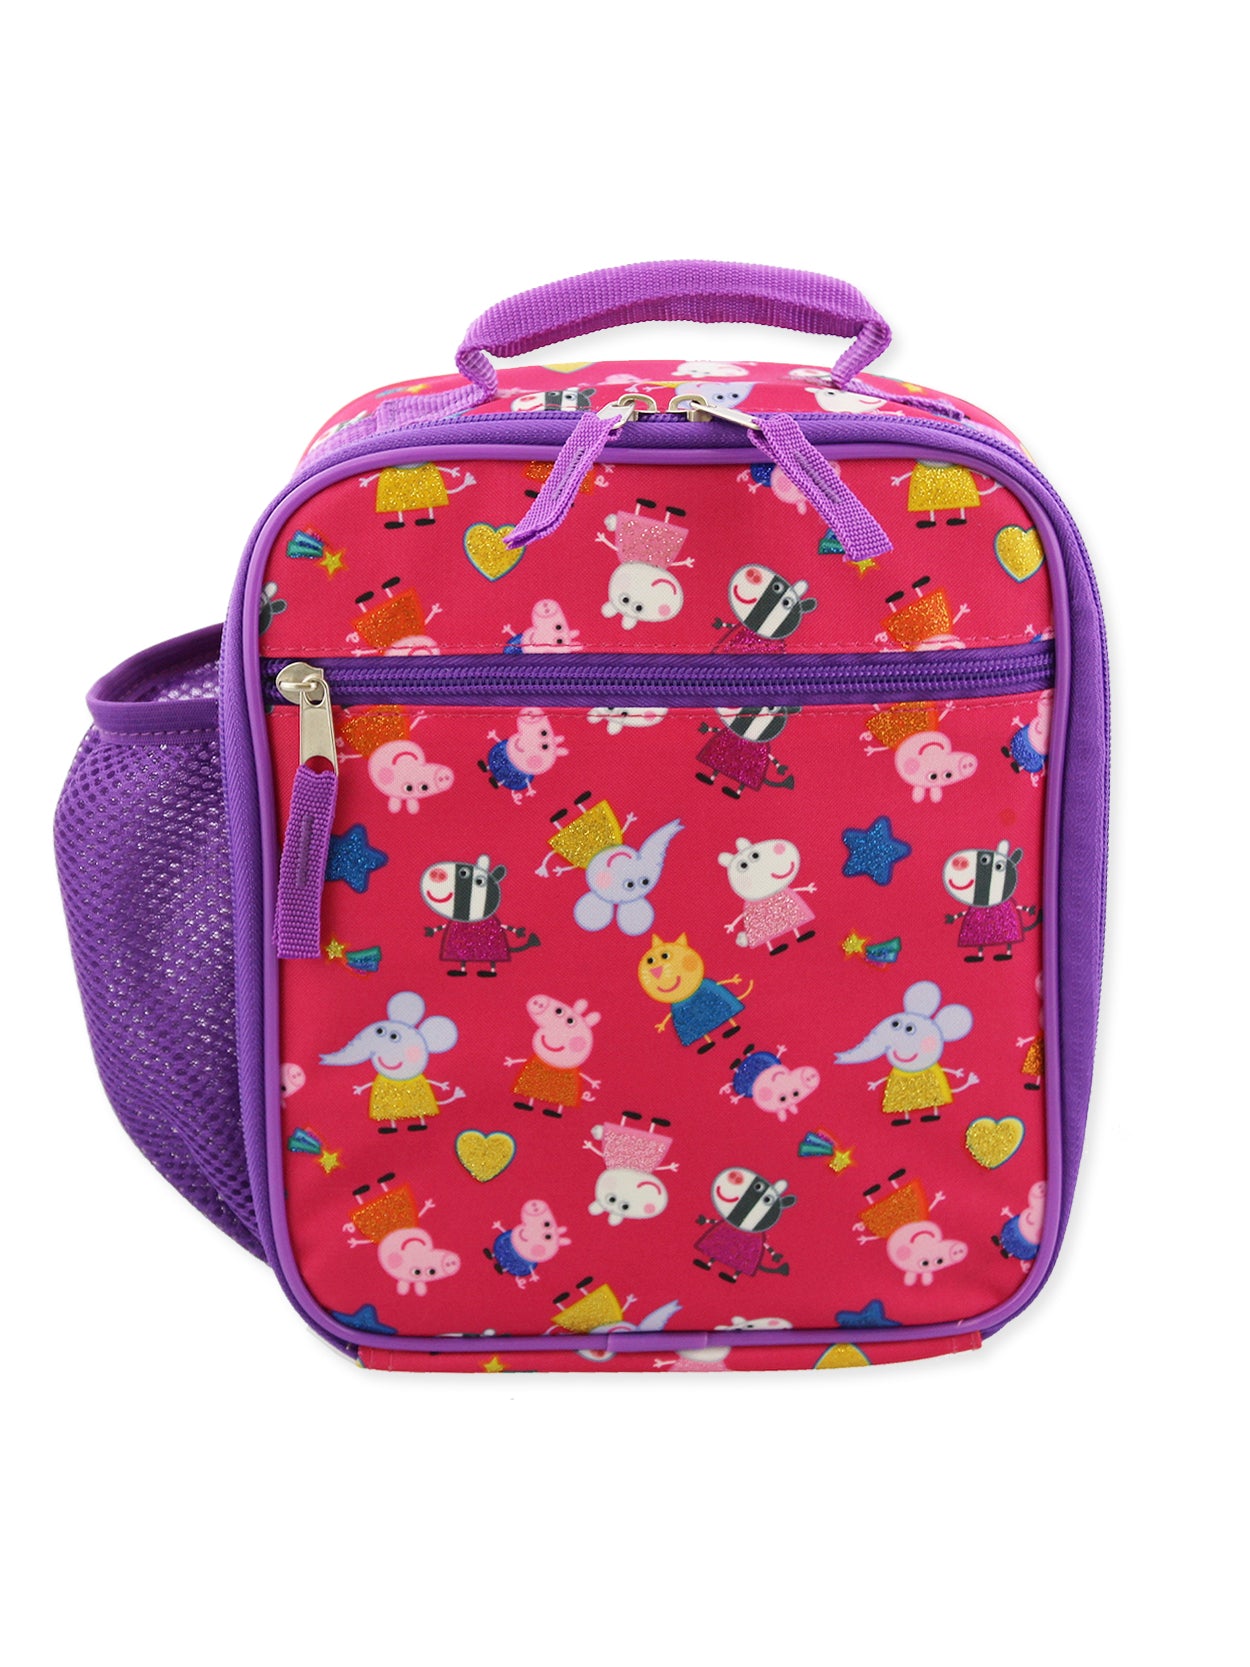 Peppa Pig Girls 5 Piece Backpack and Lunch Bag School Set (One size, Pink/Purple)